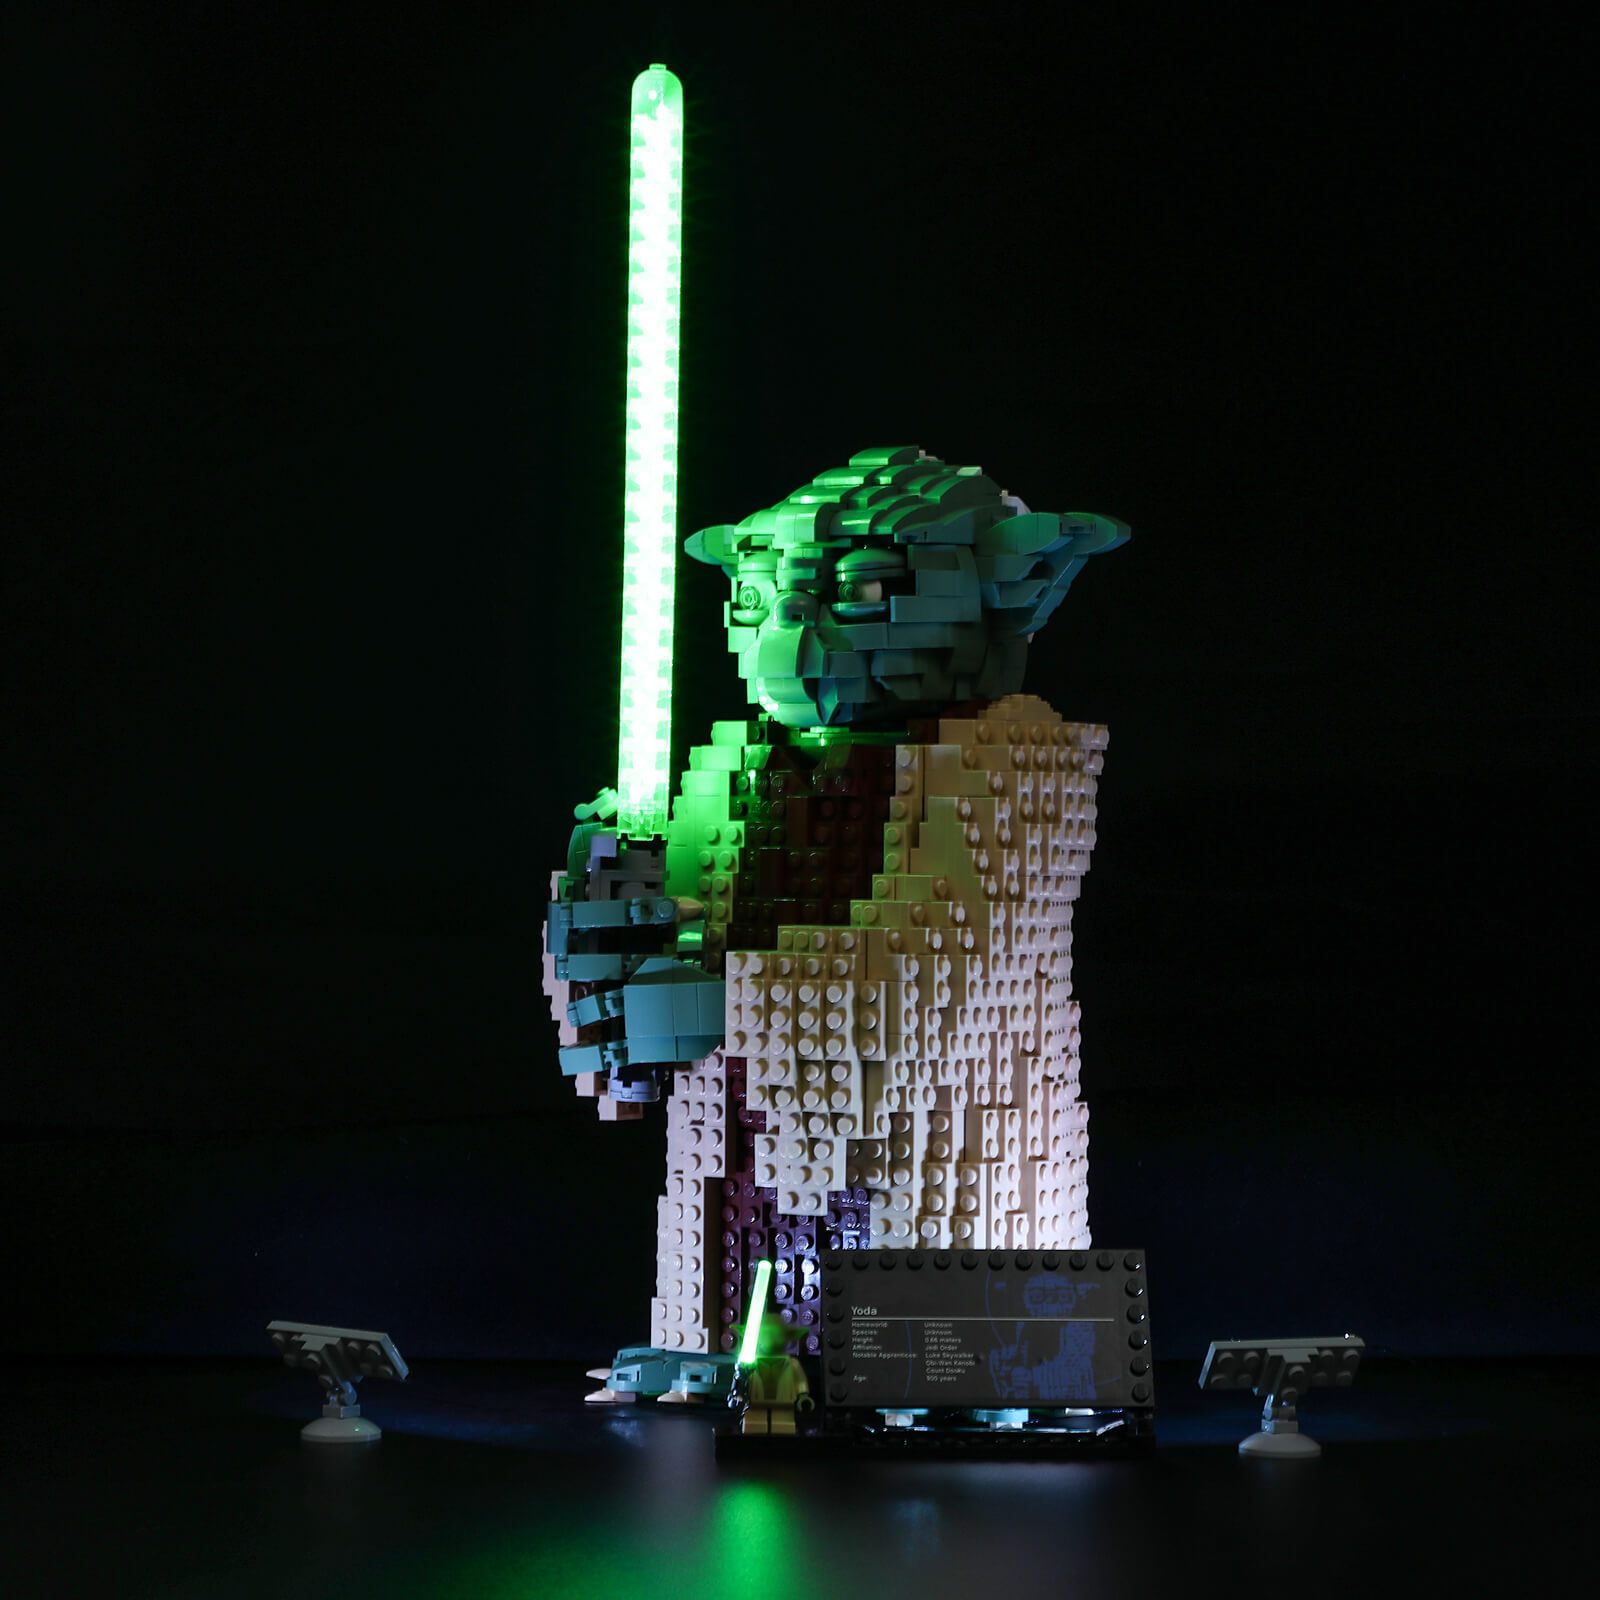 LEGO Star Wars Yoda figure with Lightsaber stands